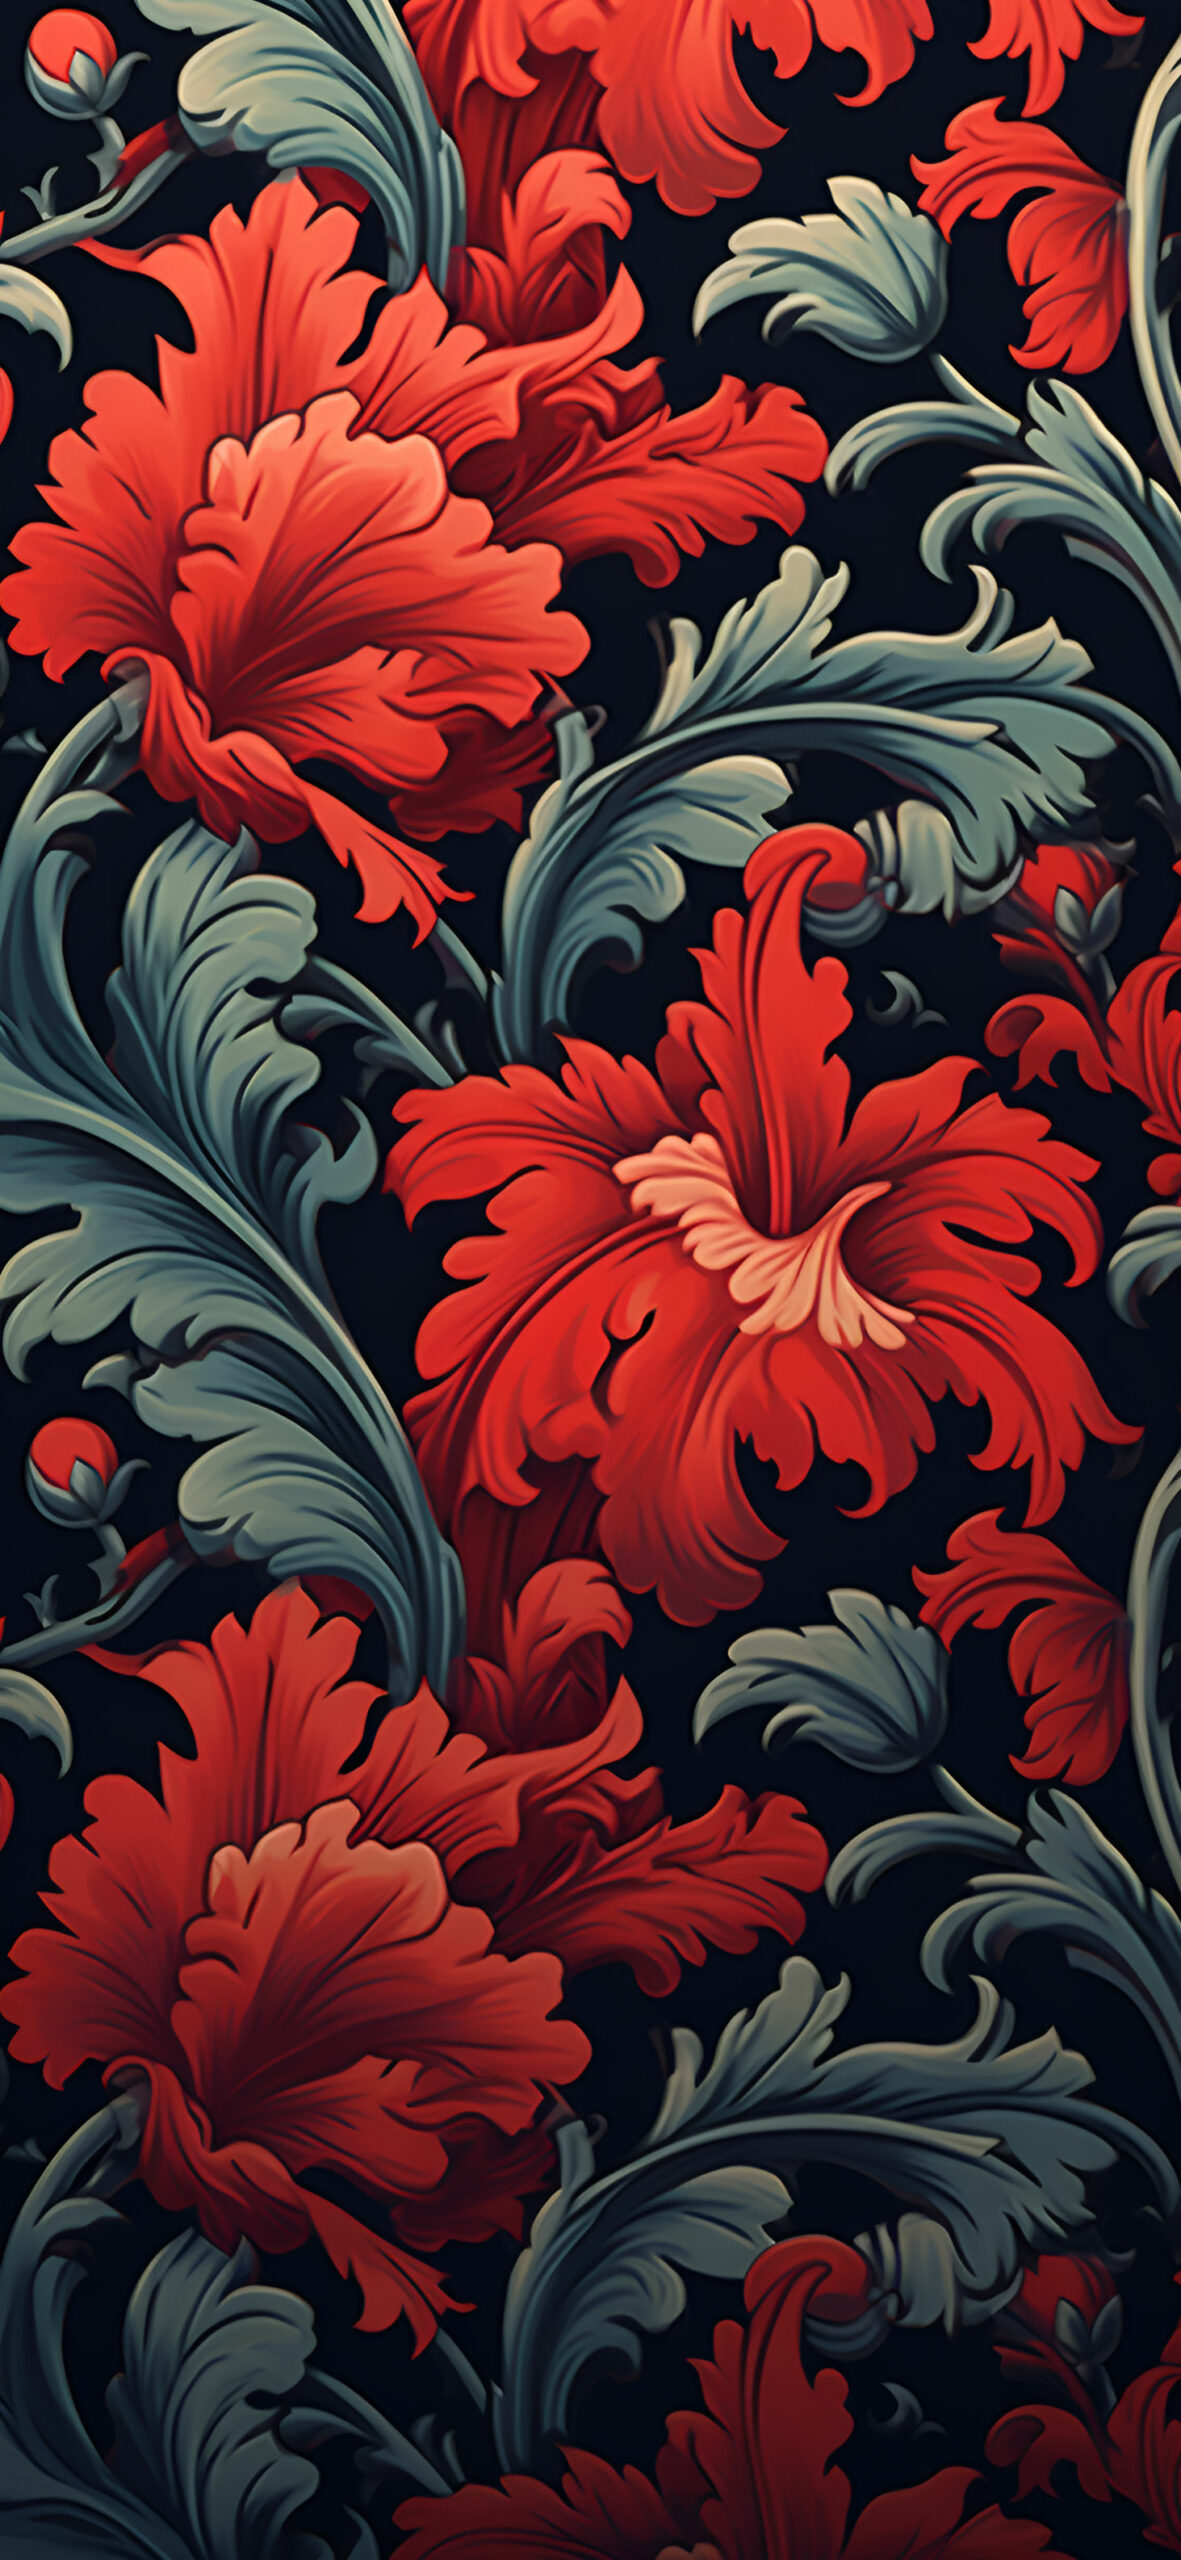 Large red flowers vintage wallpaper Cool supreme colors art wa